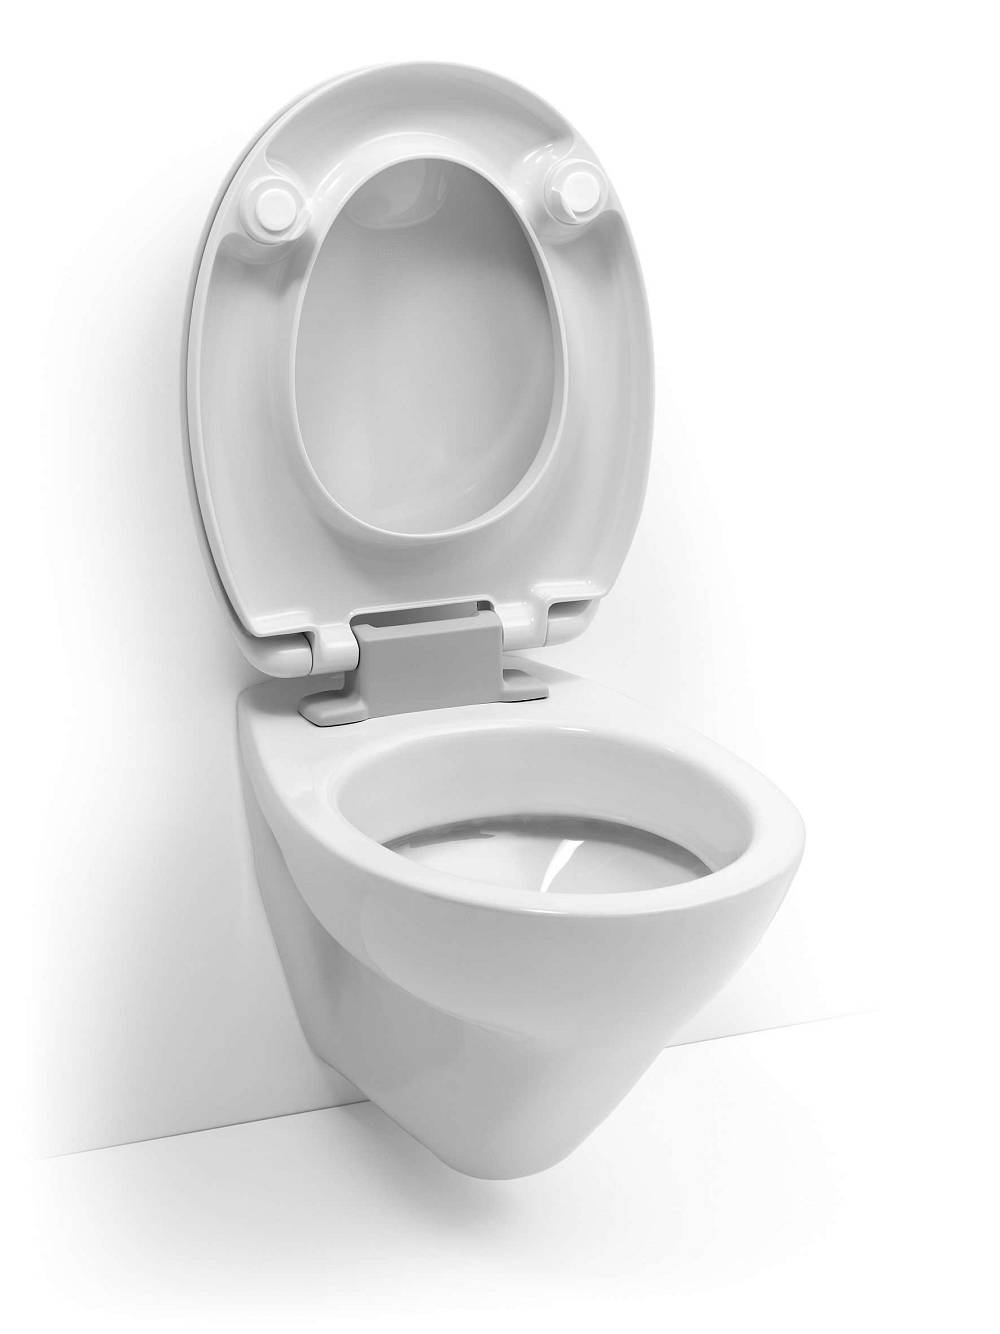 Image of fully open HAROMED toilet seat with SoftClose®.